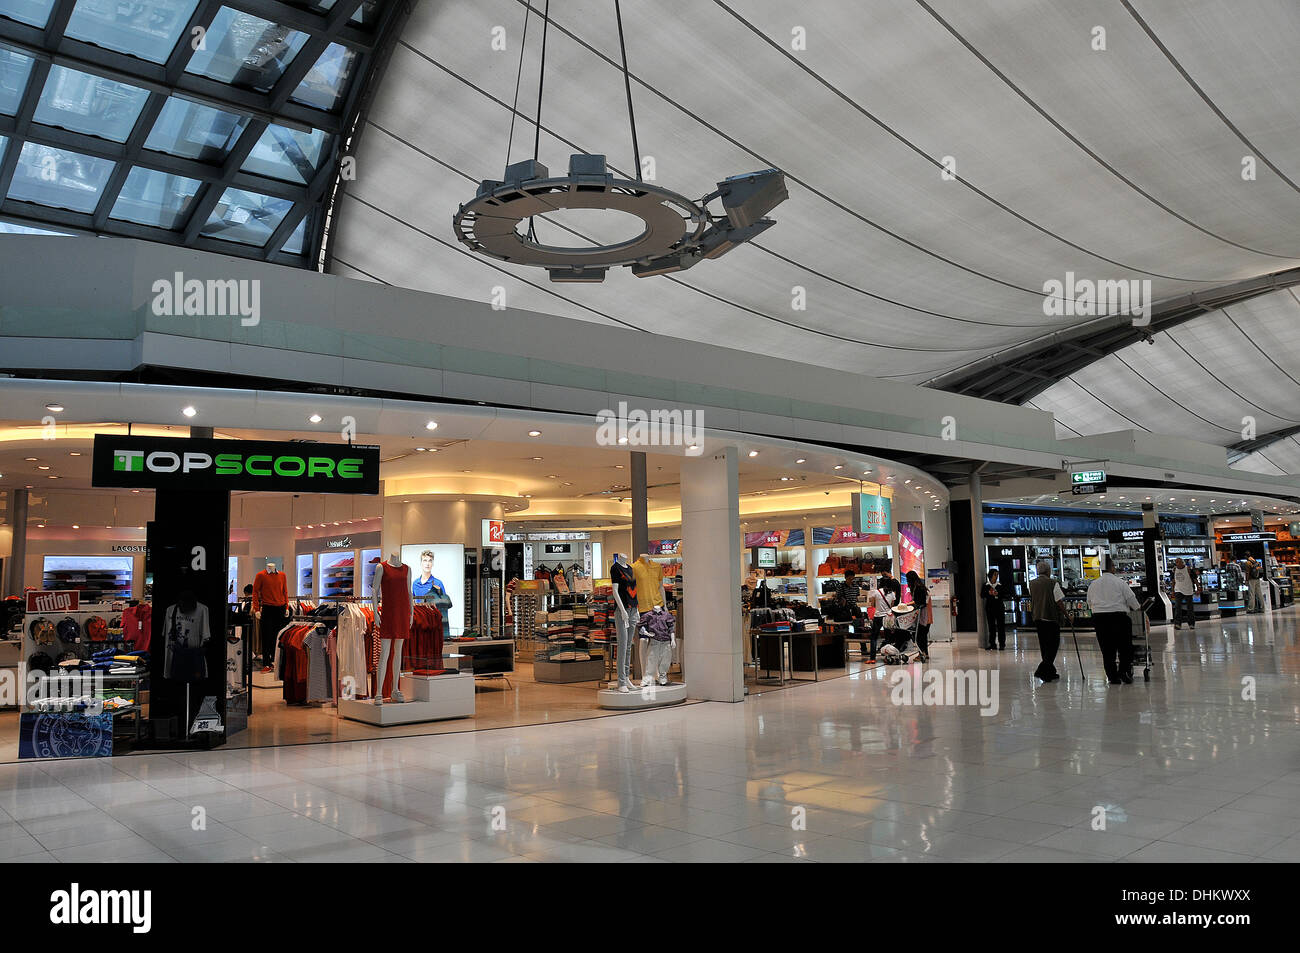 Page 2 - Duty Free Shop At Airport High Resolution Stock Photography and  Images - Alamy